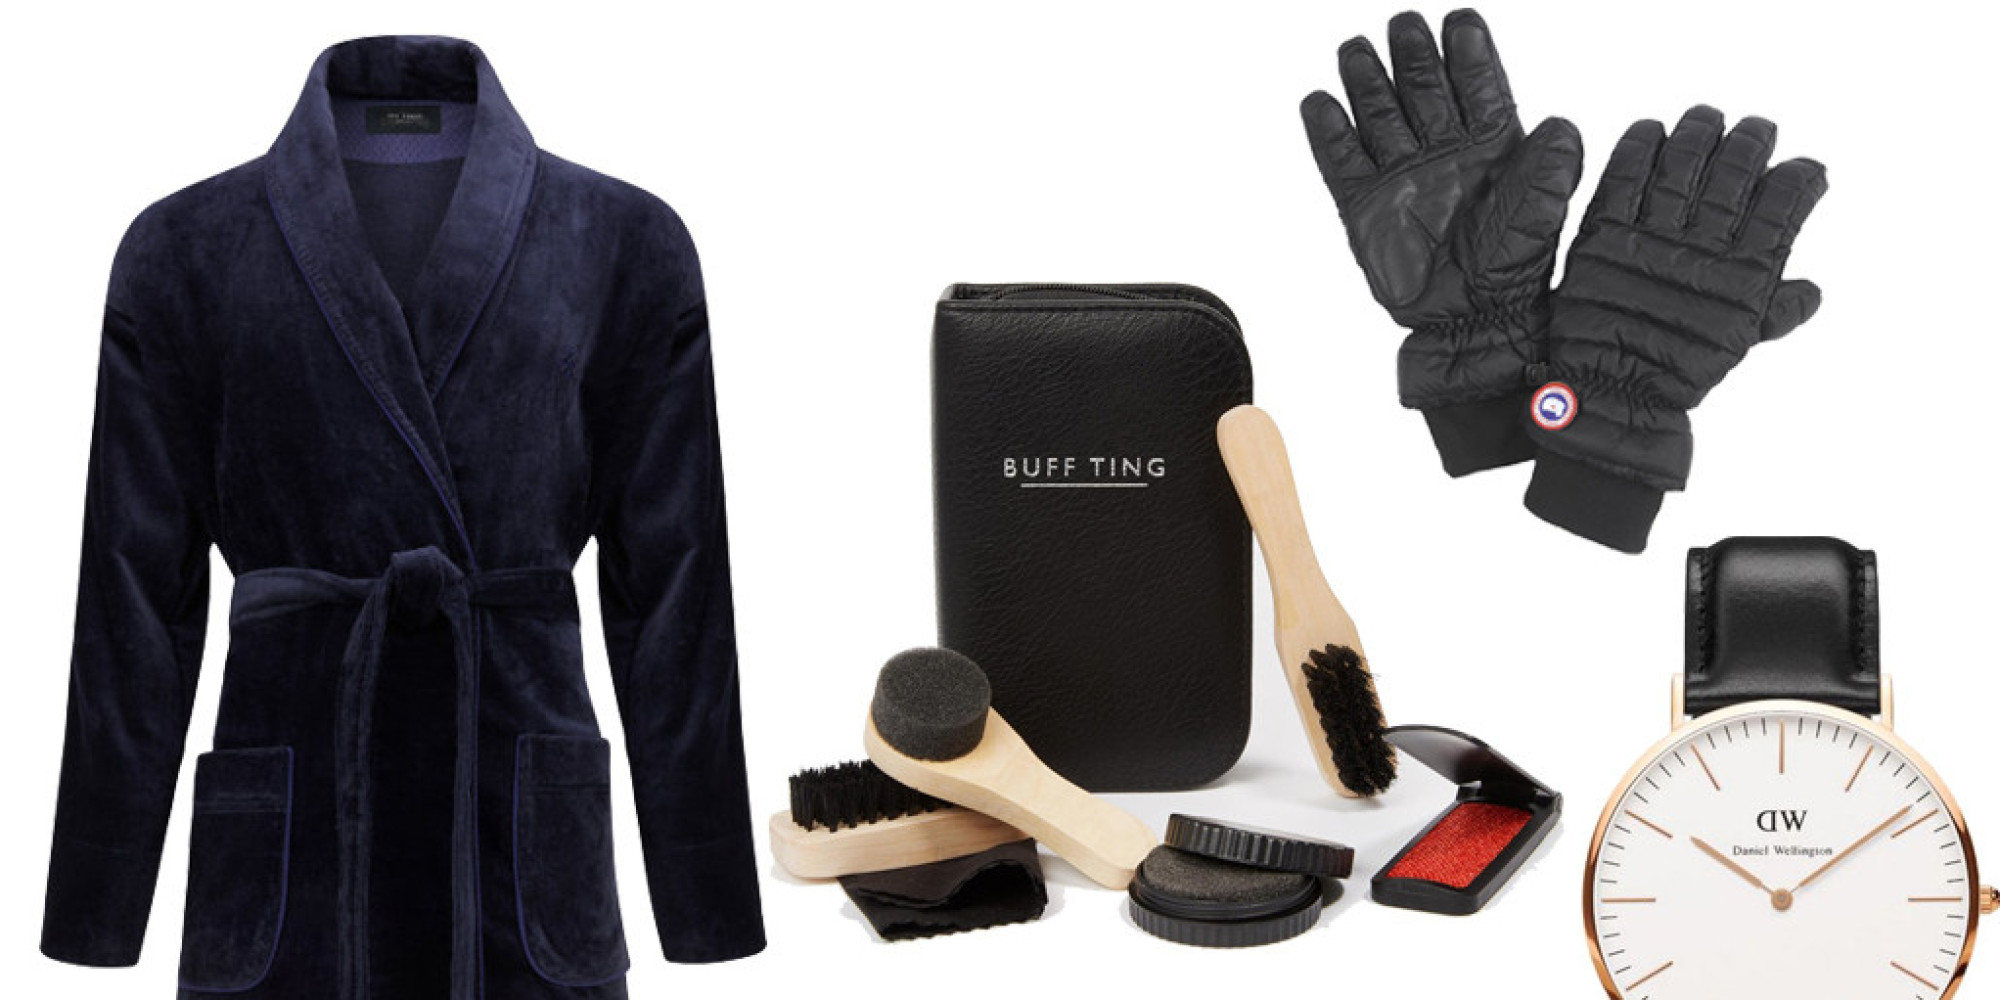 25 Very Cool Father'S Day Gifts Under $20 | Gift Guide 2020